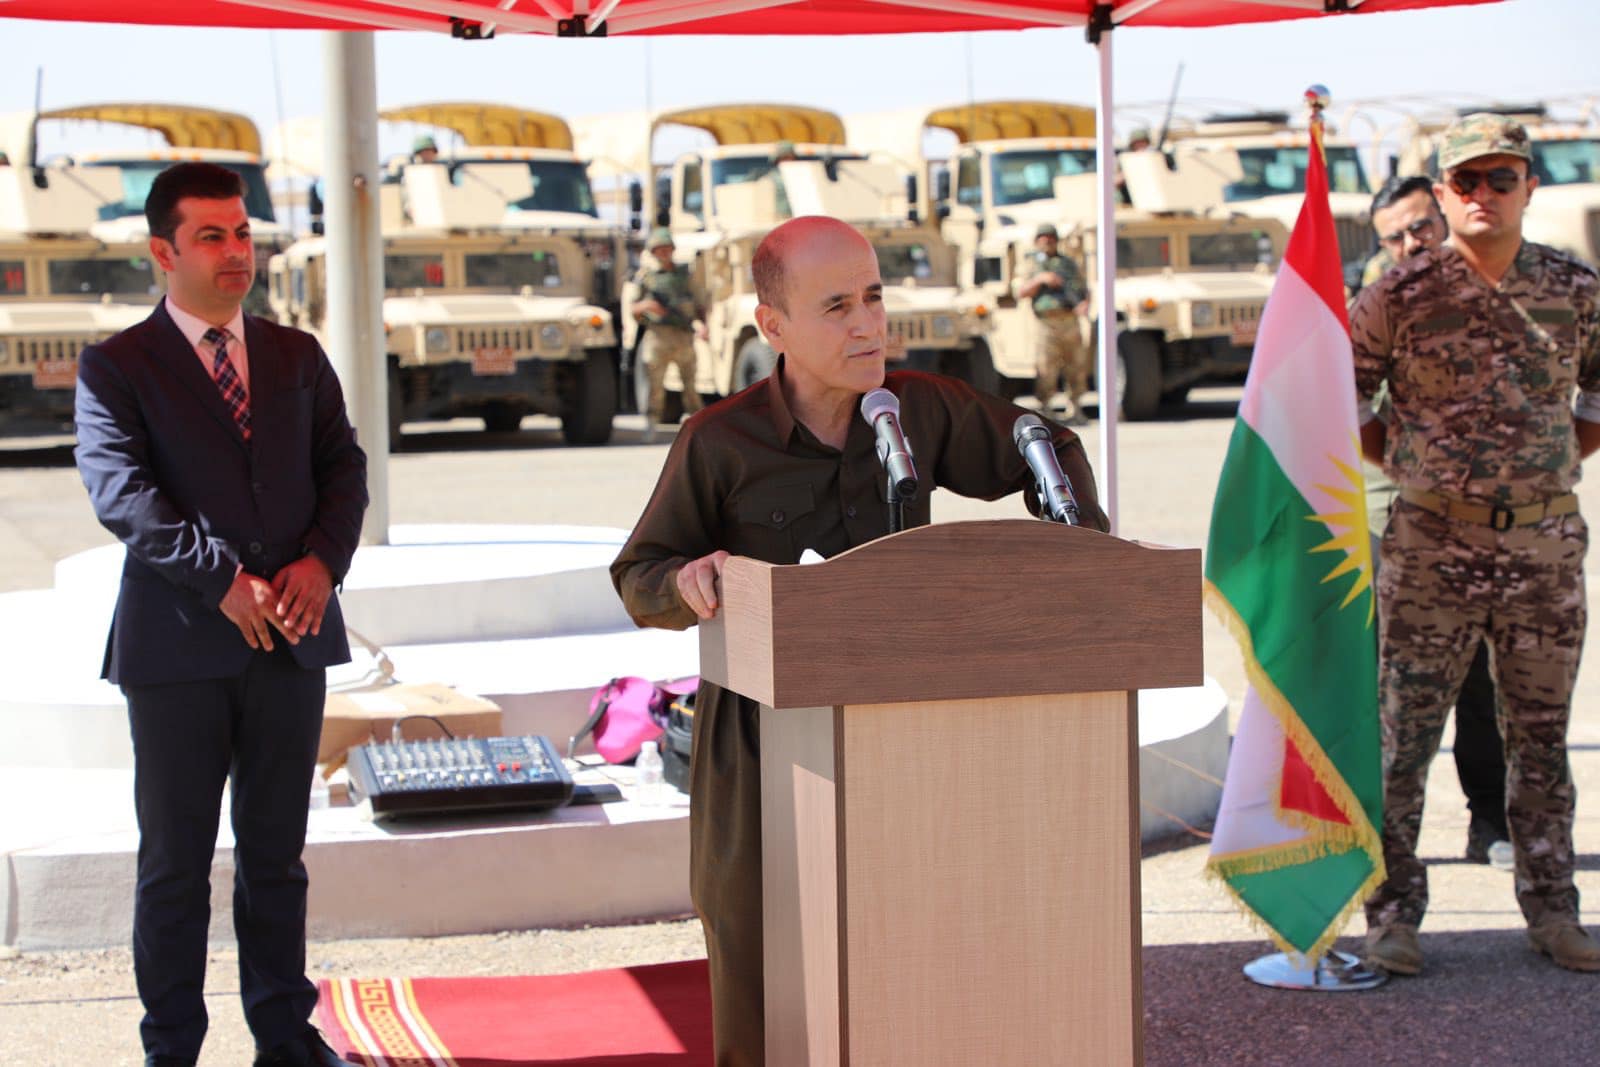 Relations between the Peshmerga forces and the Iraqi army have improved, Ismail says 